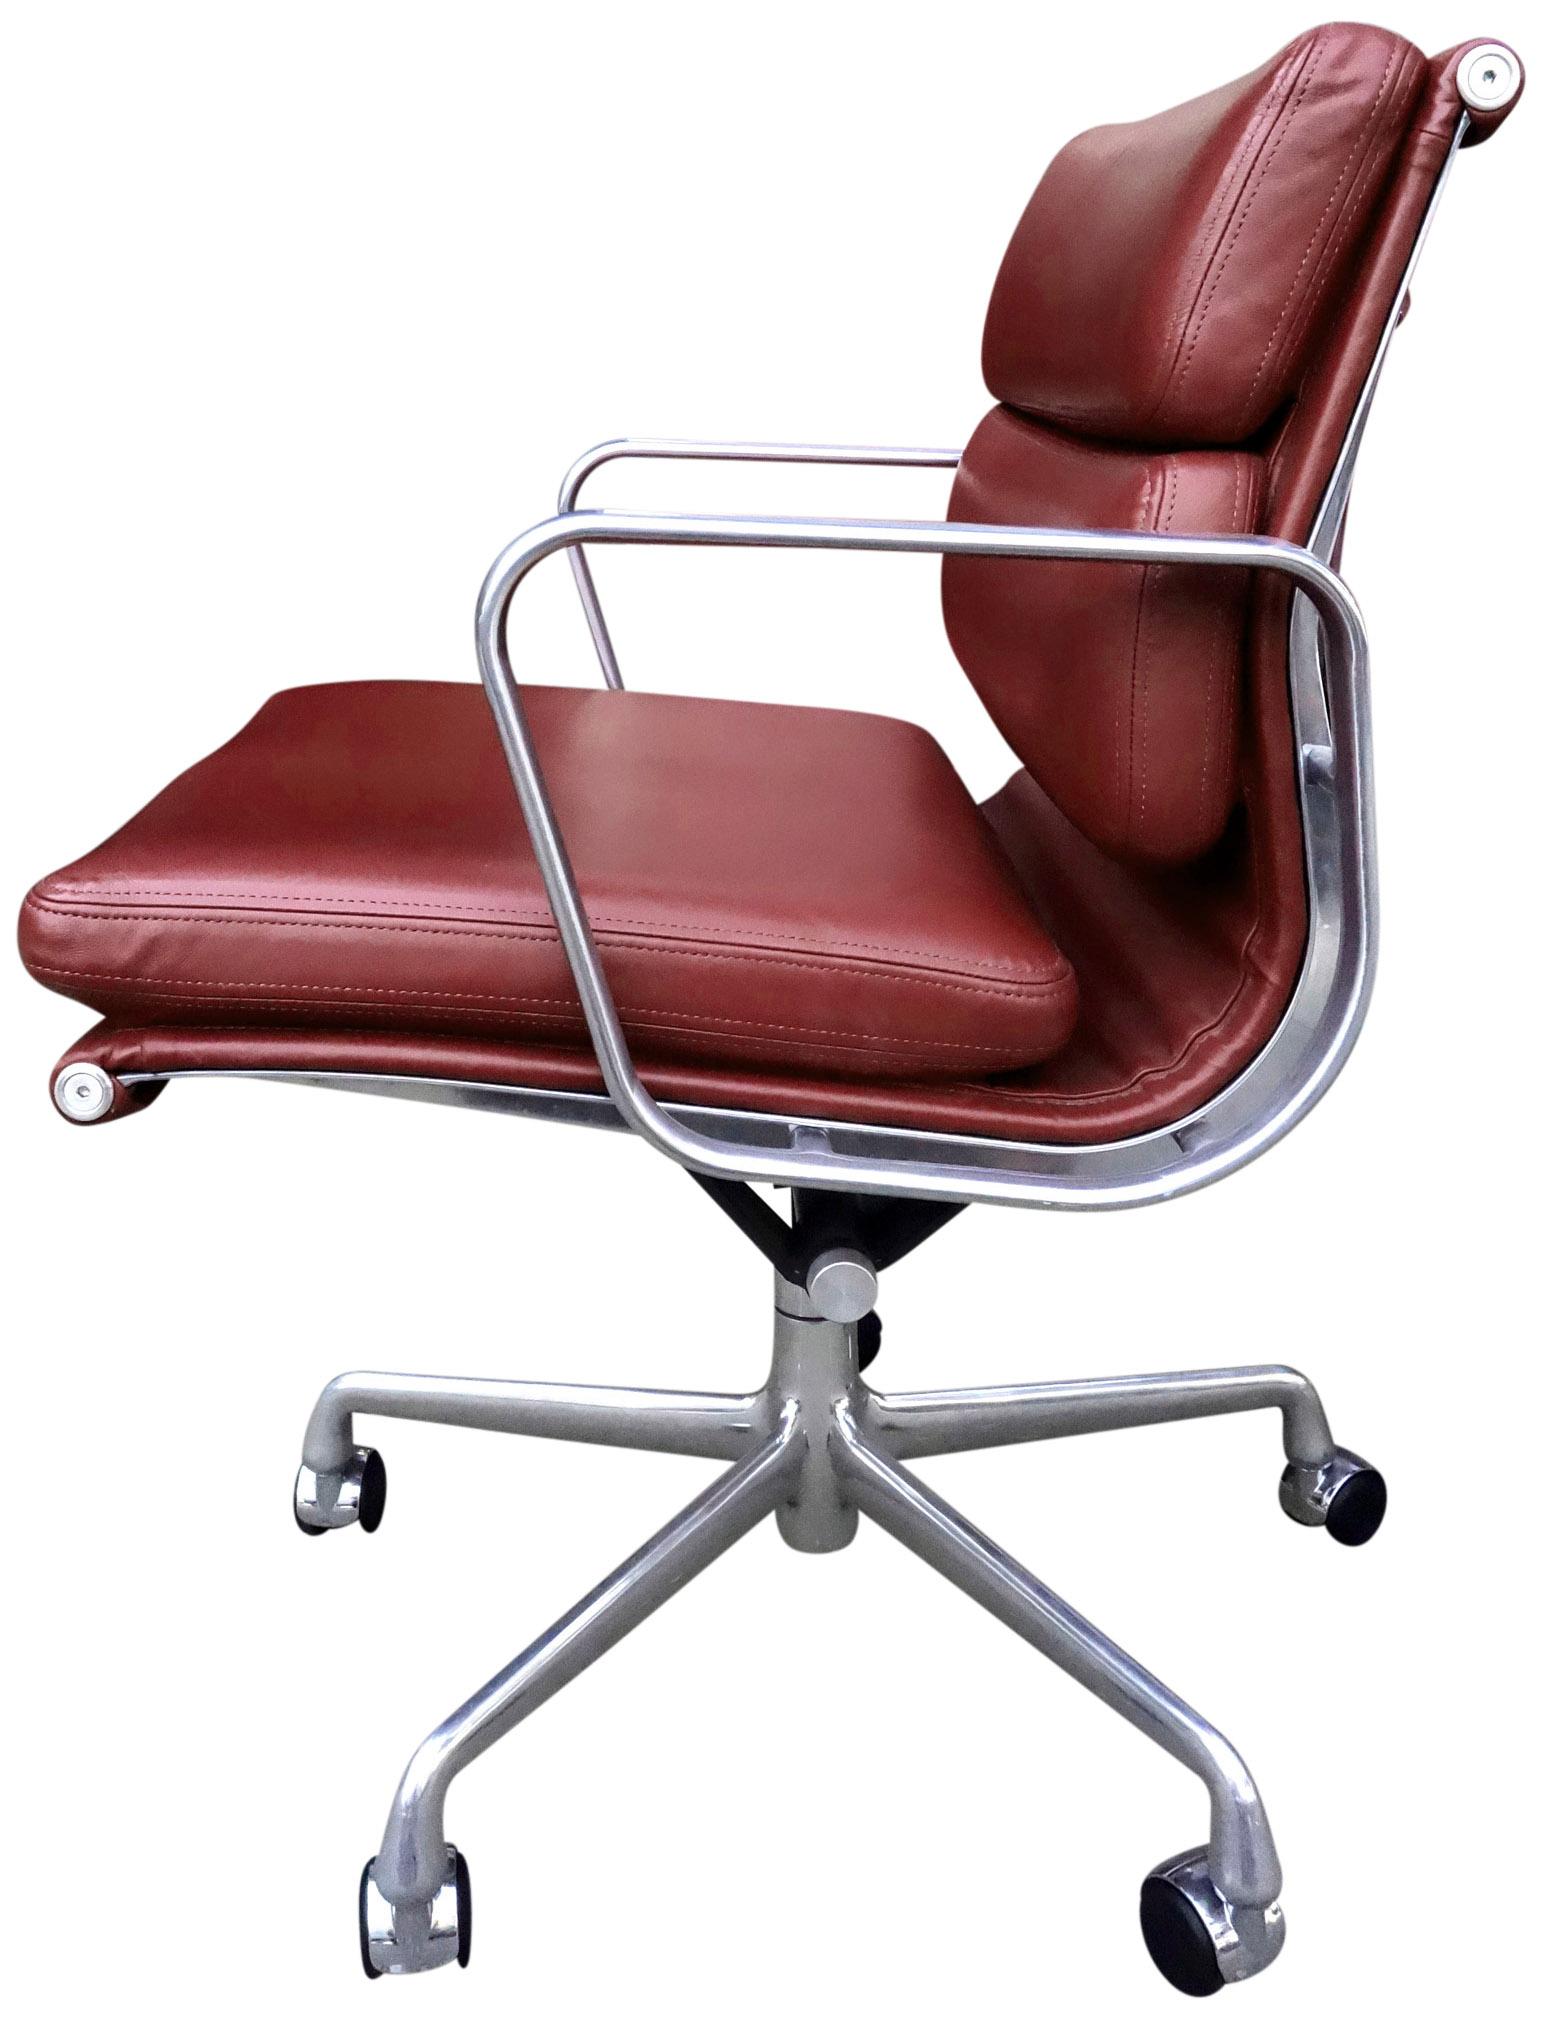 For your consideration is this authentic Eames for Herman Miller vintage soft pad chairs on 5 star base in ox blood red, burgundy leather. Adjustable tilt and height with manual lift. This authentic vintage example are icons of Mid-Century Modern